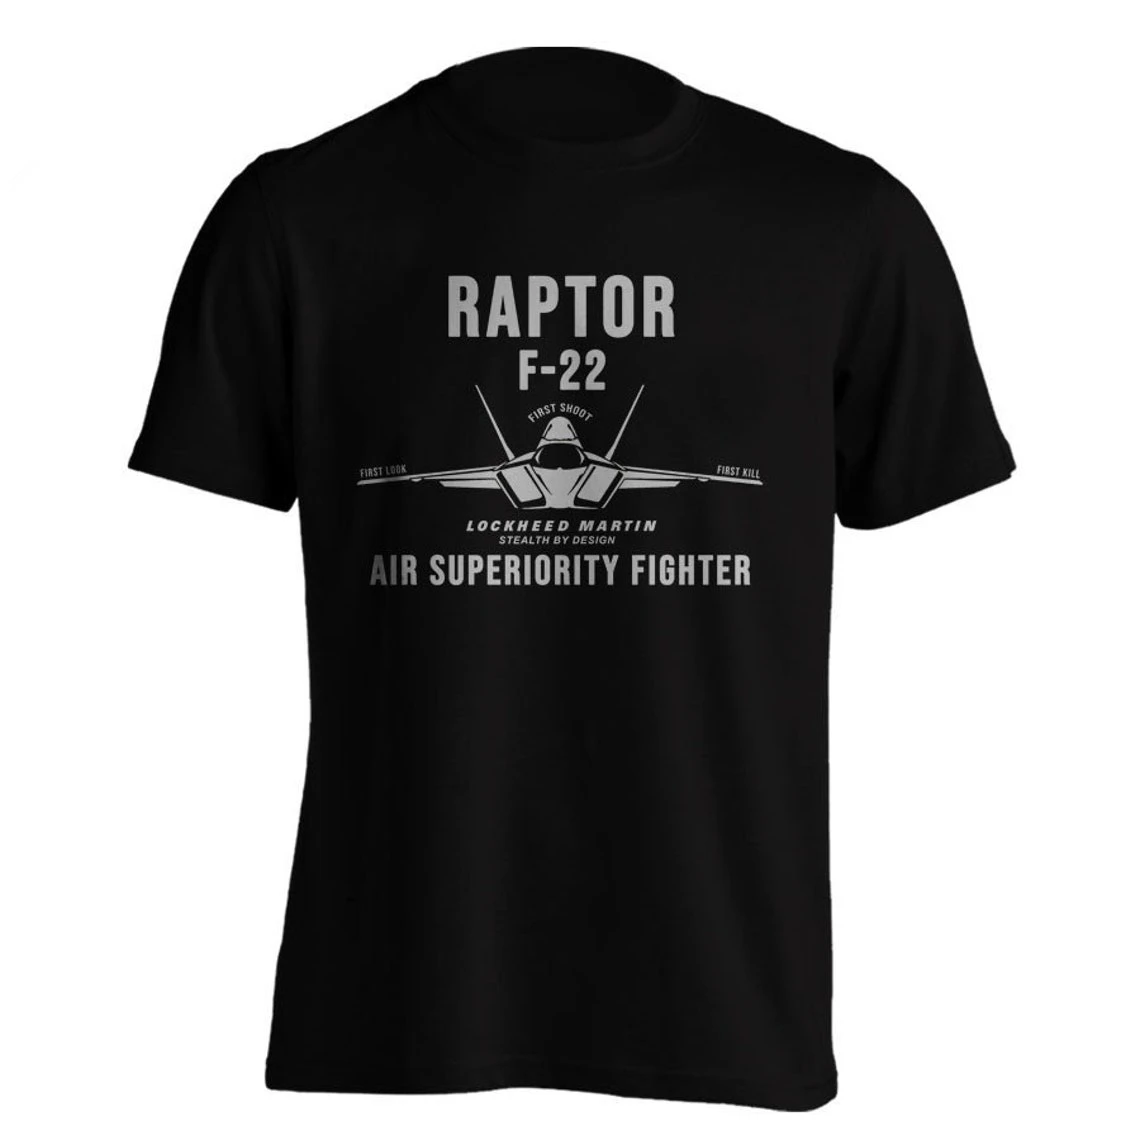 F-22 Raptor Stealth Air Superiority Fighter Men T-Shirt Short Sleeve Casual 100% Cotton T Shirts O-Neck Tops Tees